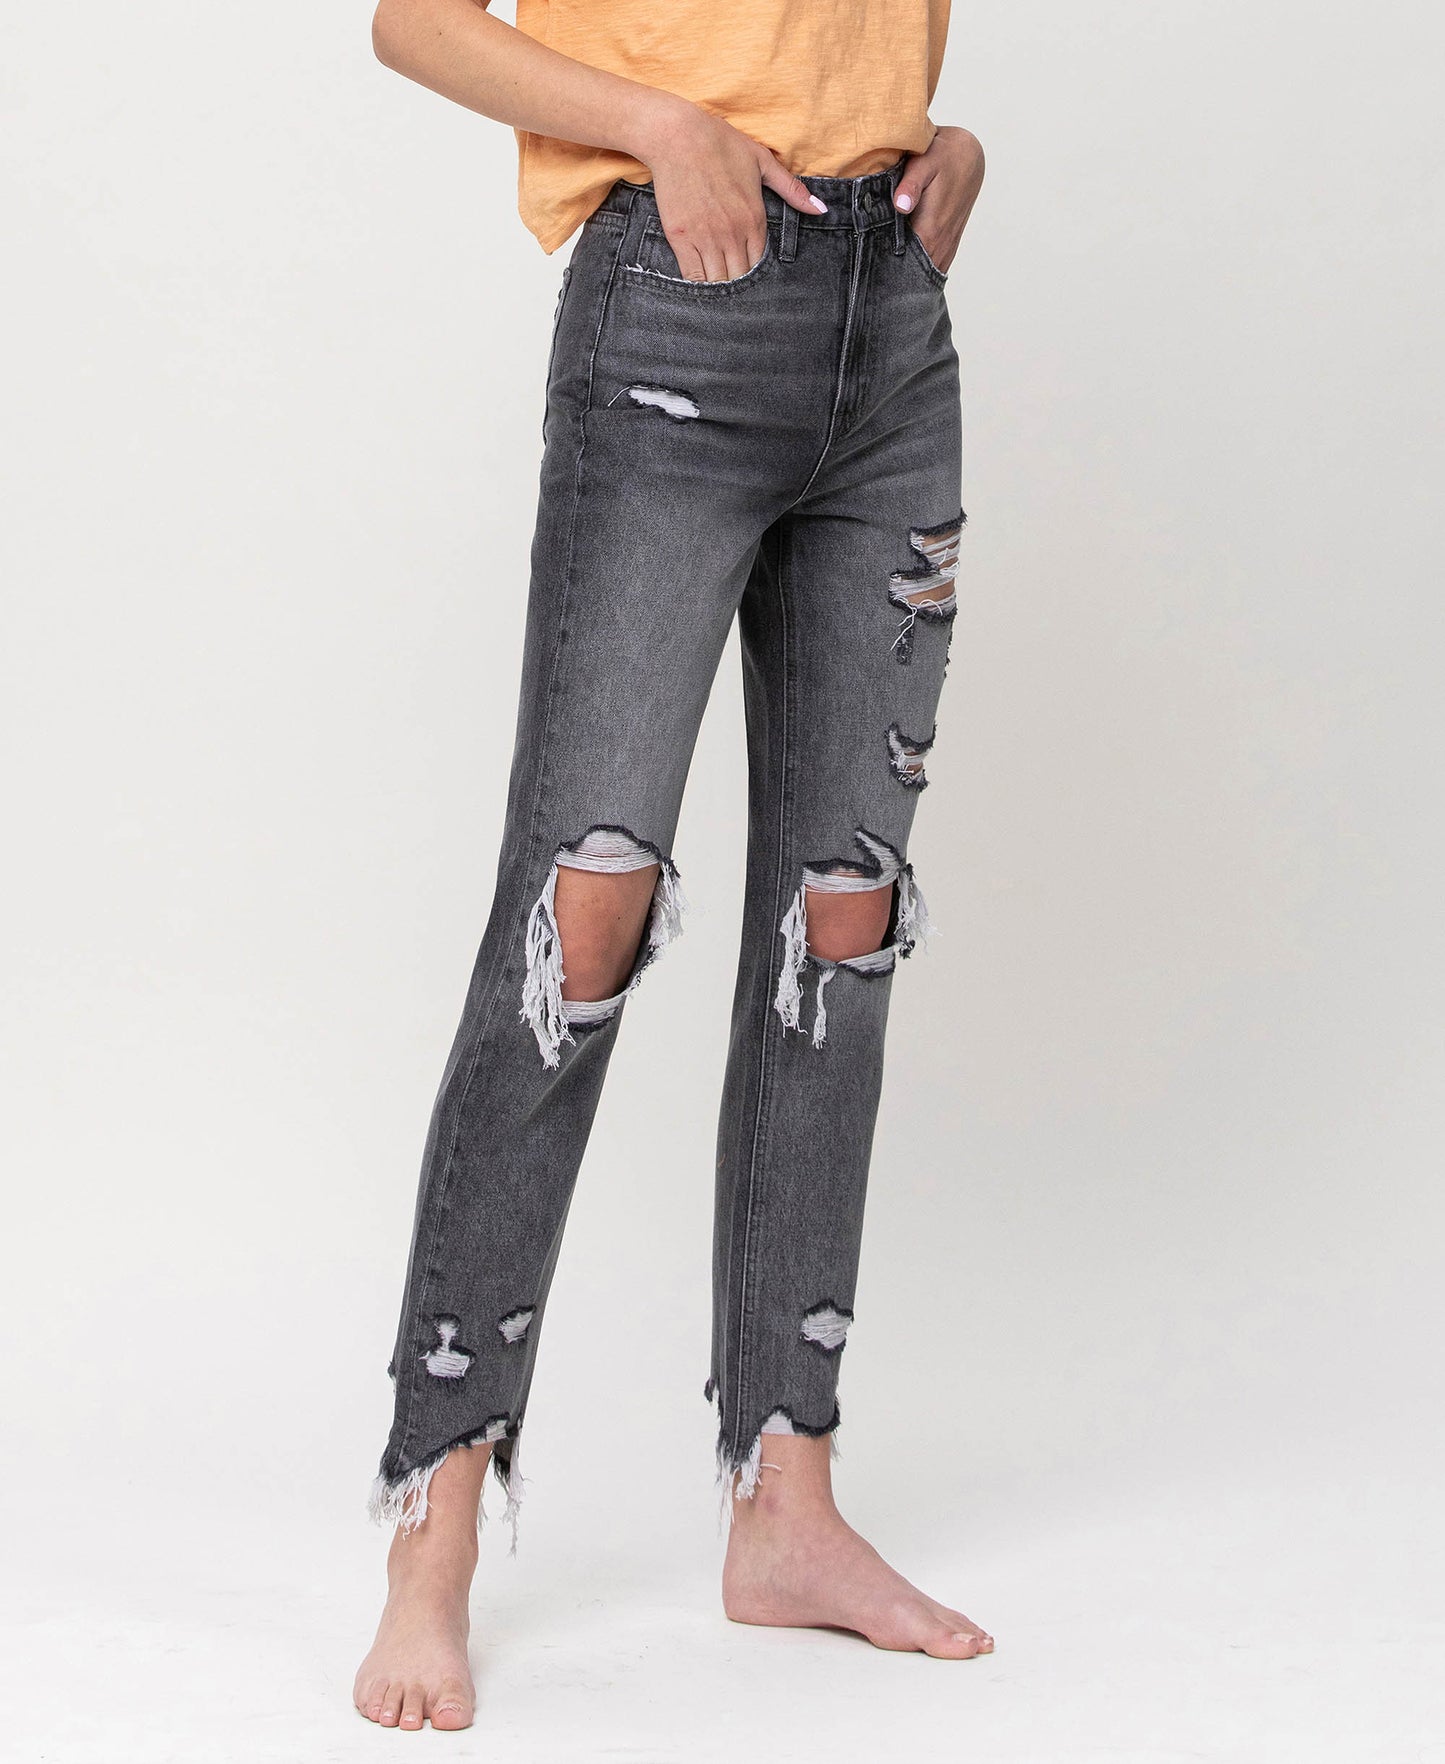 Right 45 degrees product image of Saltwater - Distressed Super High Rise Straight Ankle Jeans